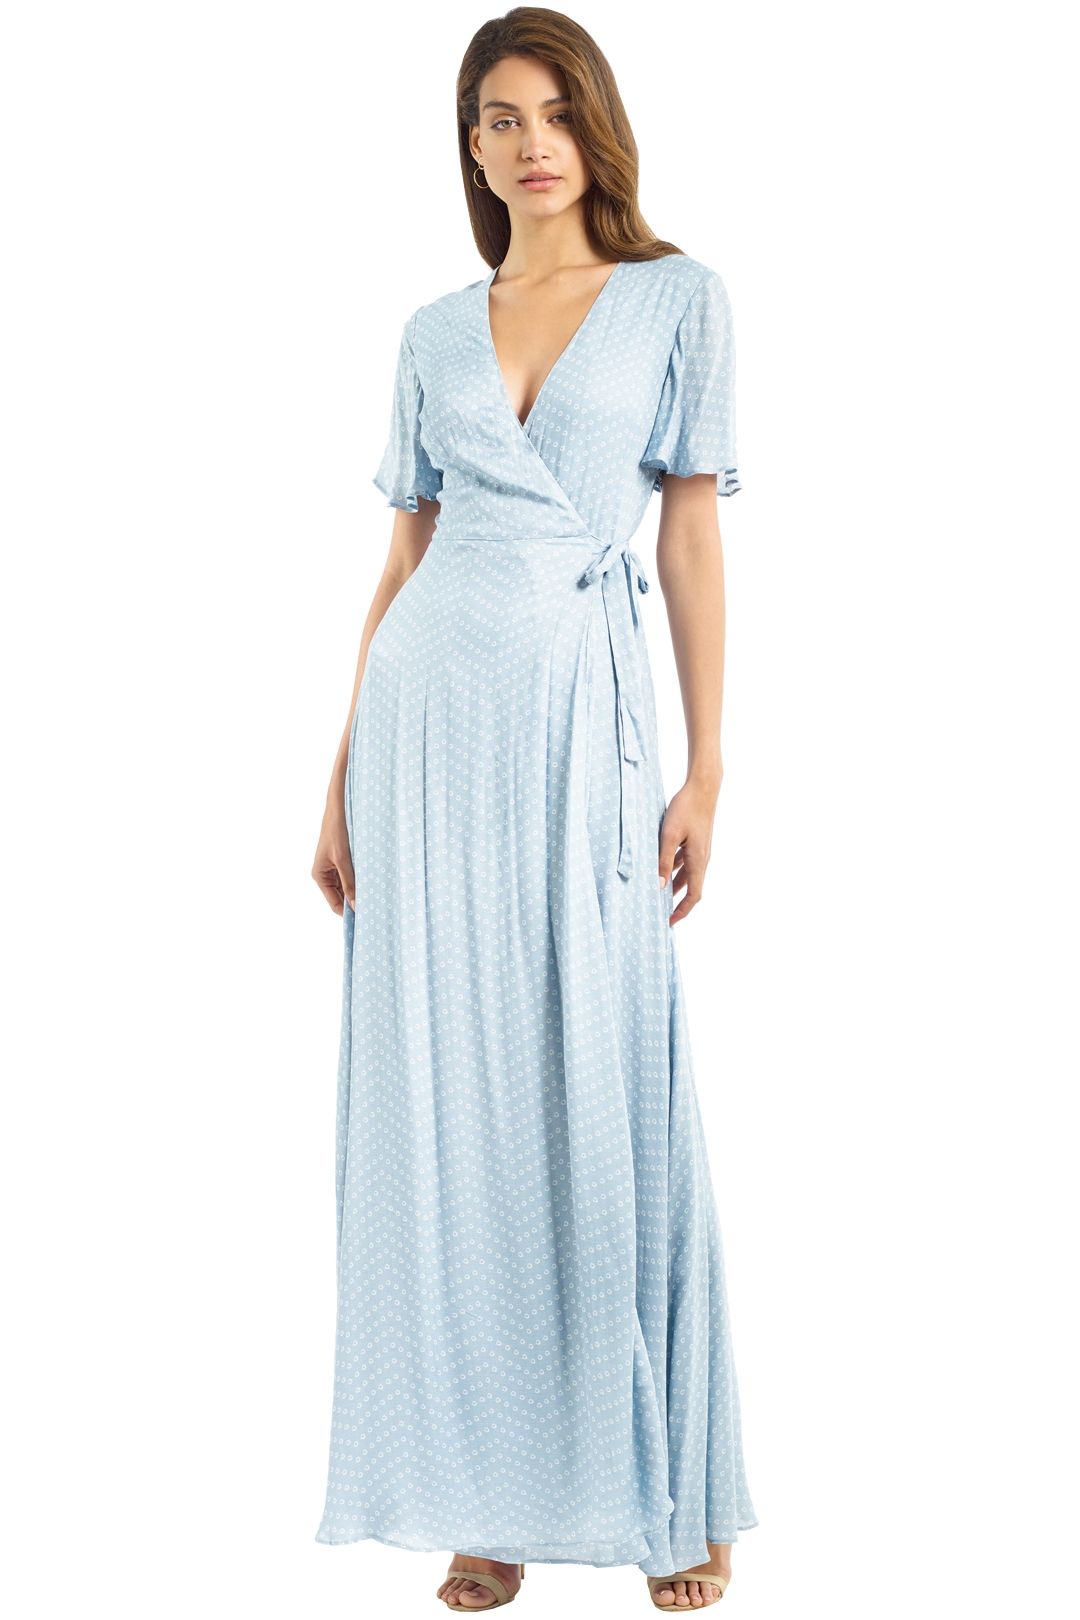 Mohea Maxi Wrap Dress by The Jetset Diaries for Hire